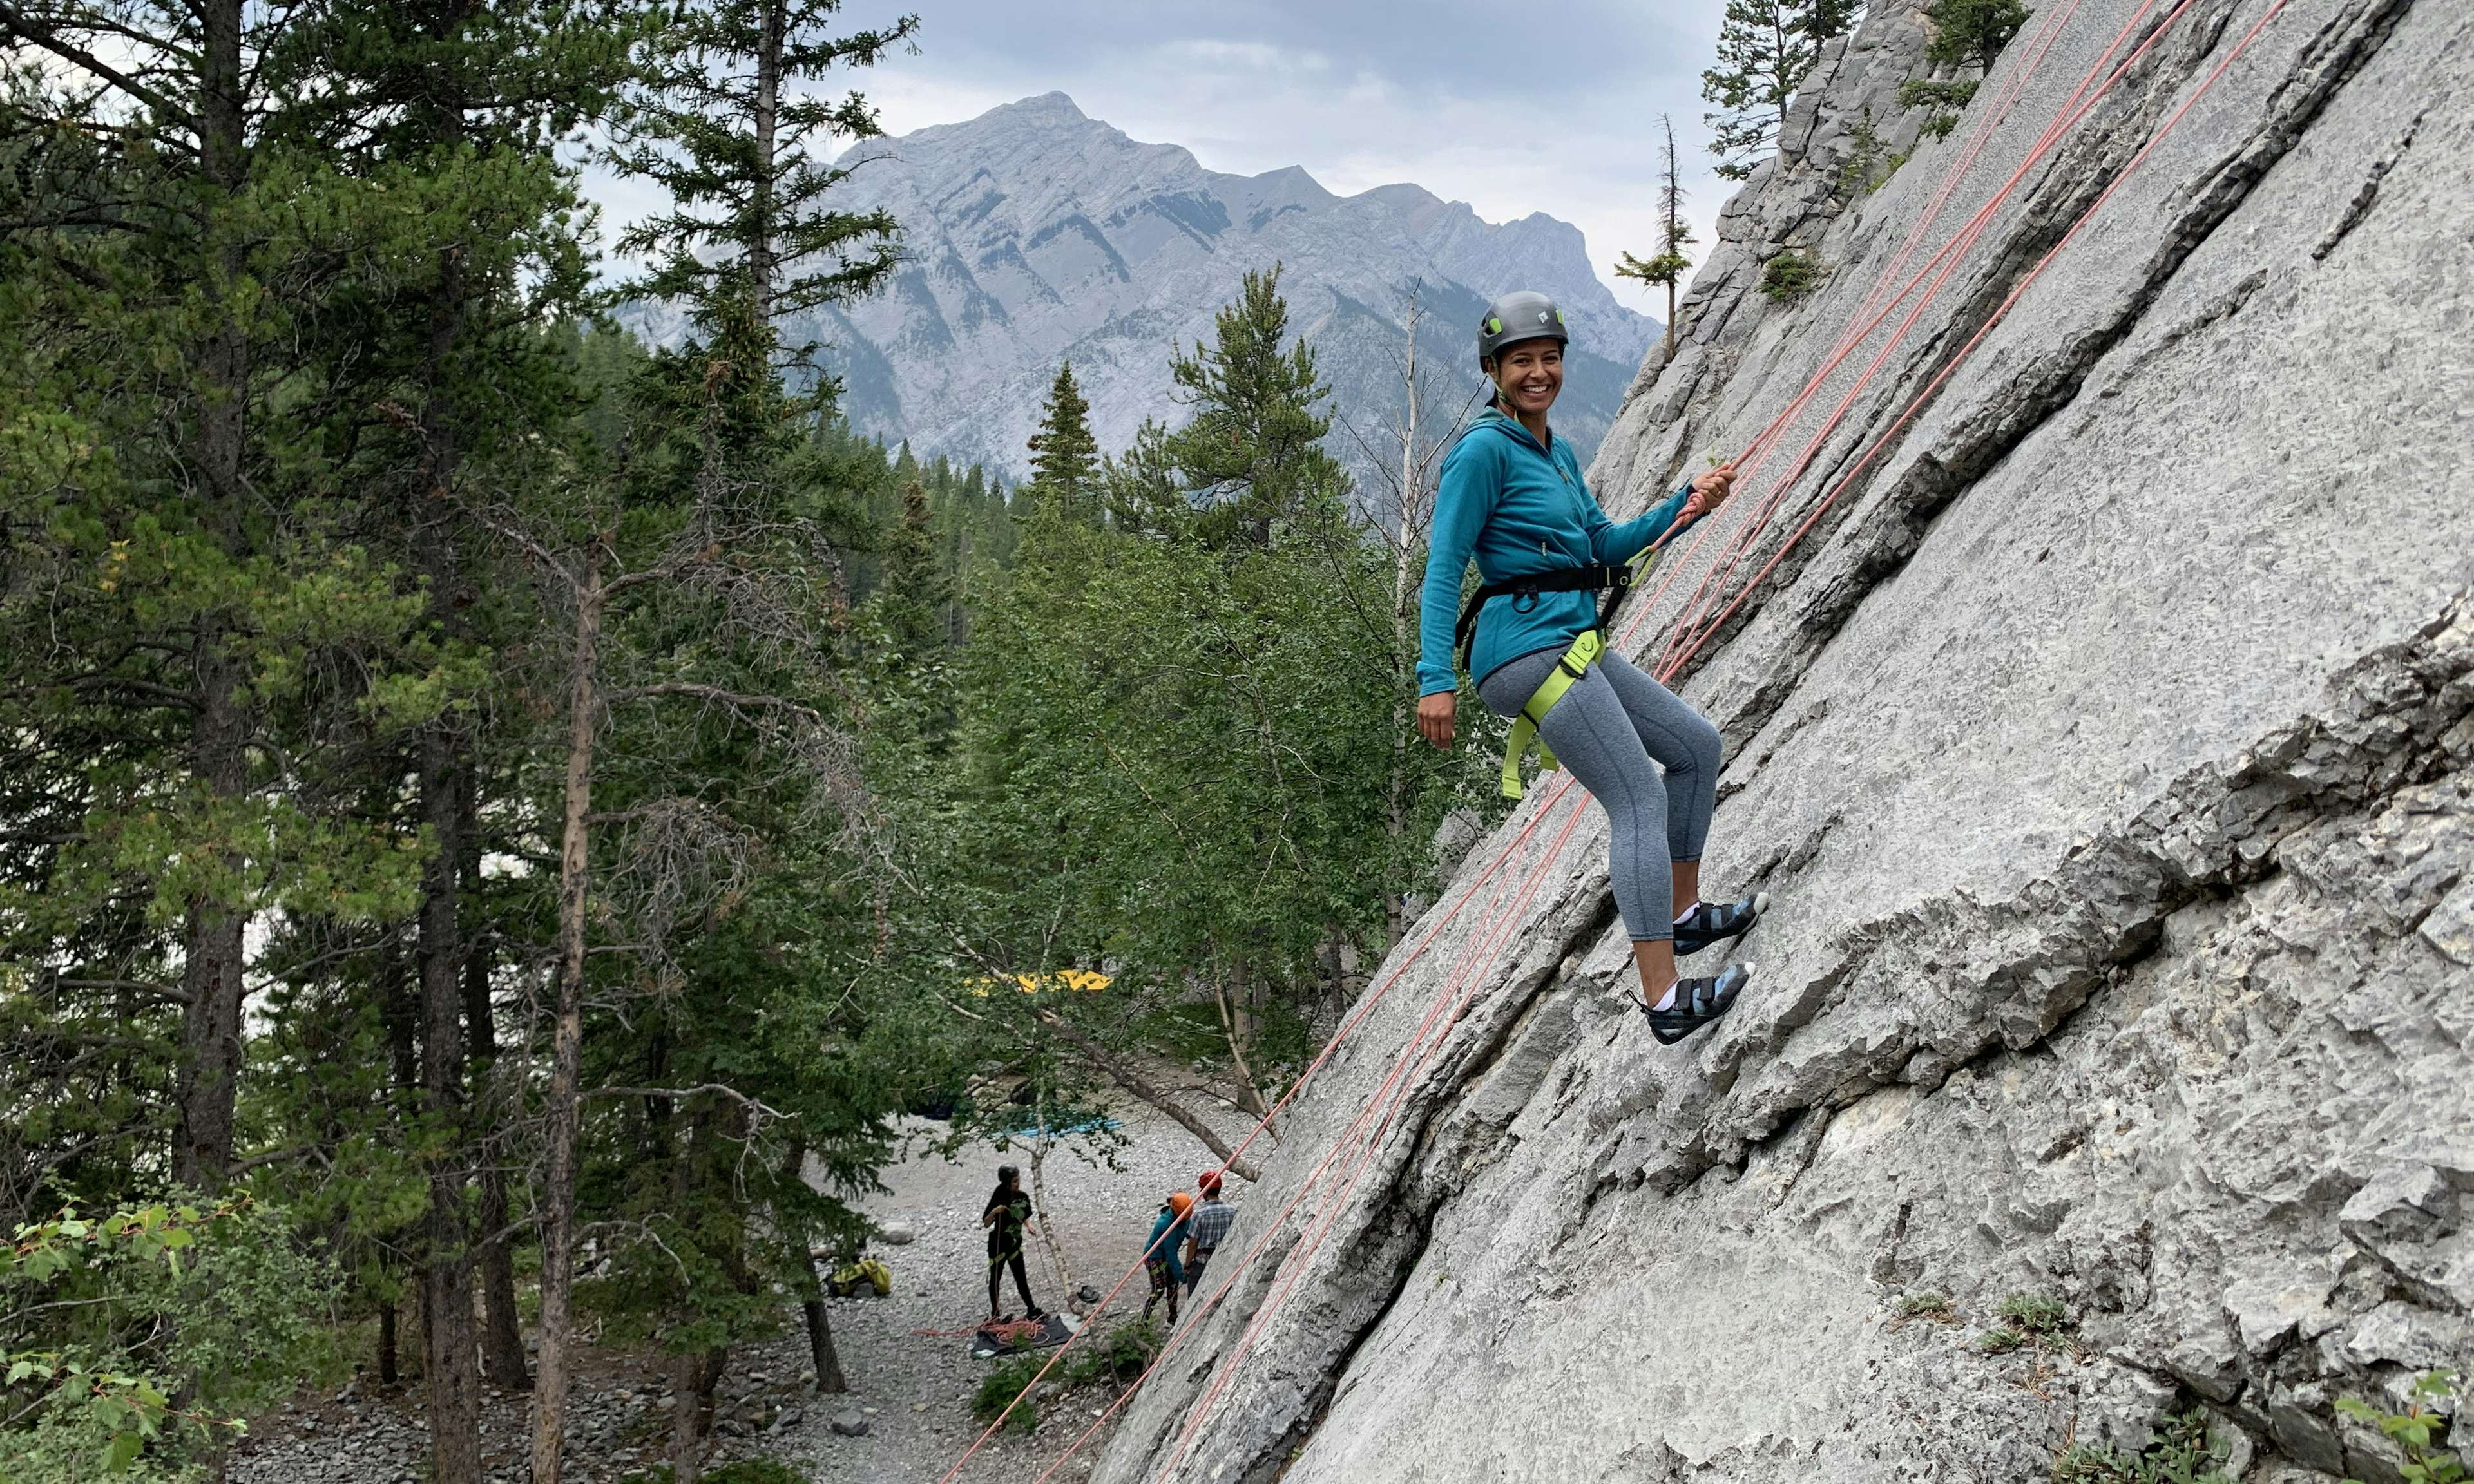 Climber on a rock wall smiling, with mountains in the background